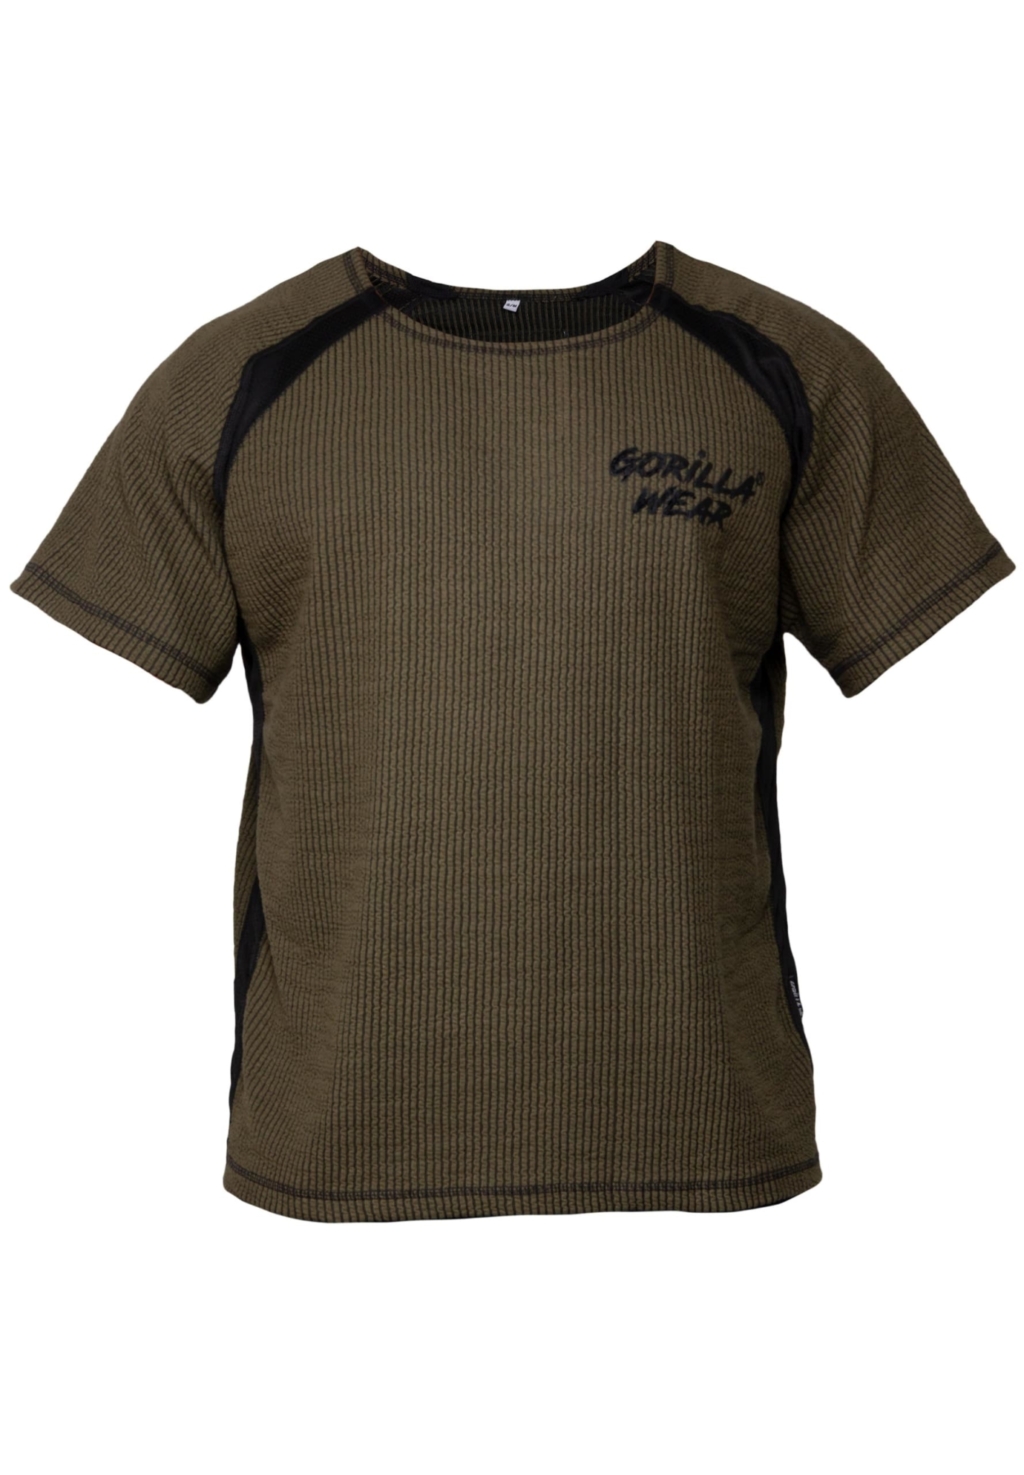 90541409 augustine old school work out top army green 012 scaled scaled